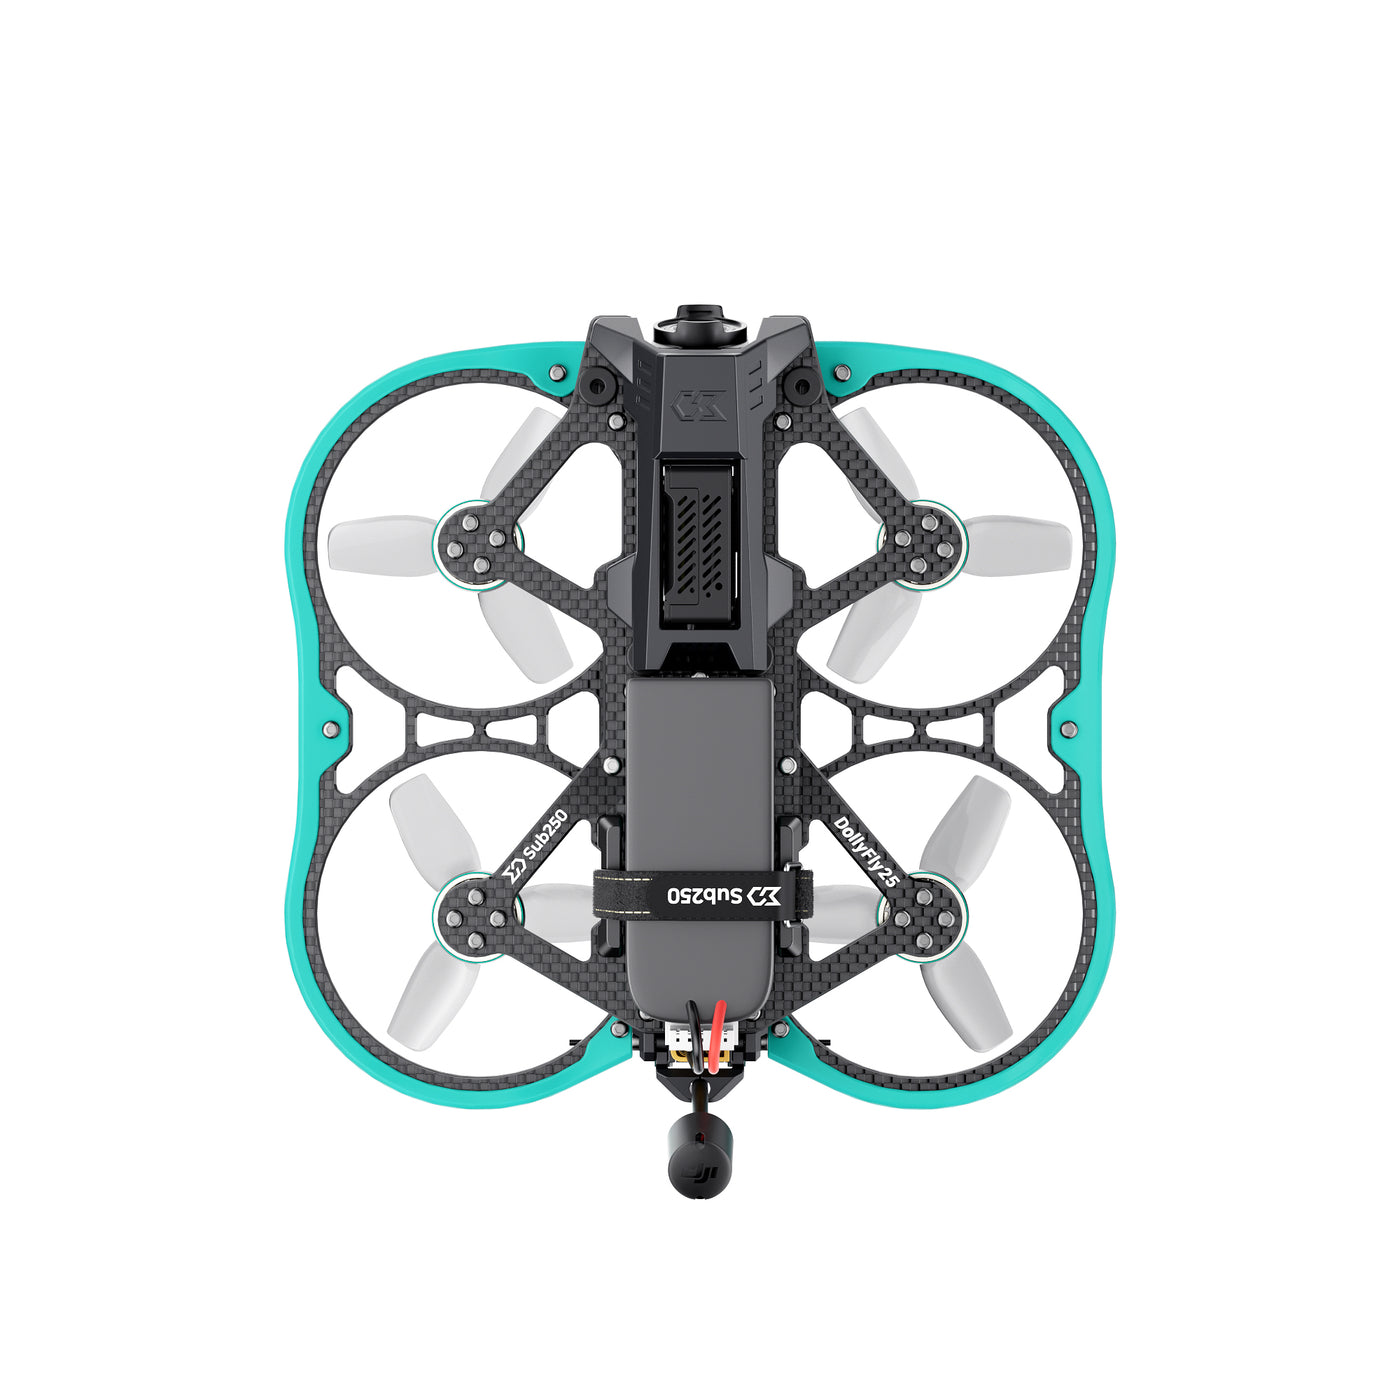 Sub250 DollyFly25 HD O3 with LED 2.5-inch 4S CineWhoop